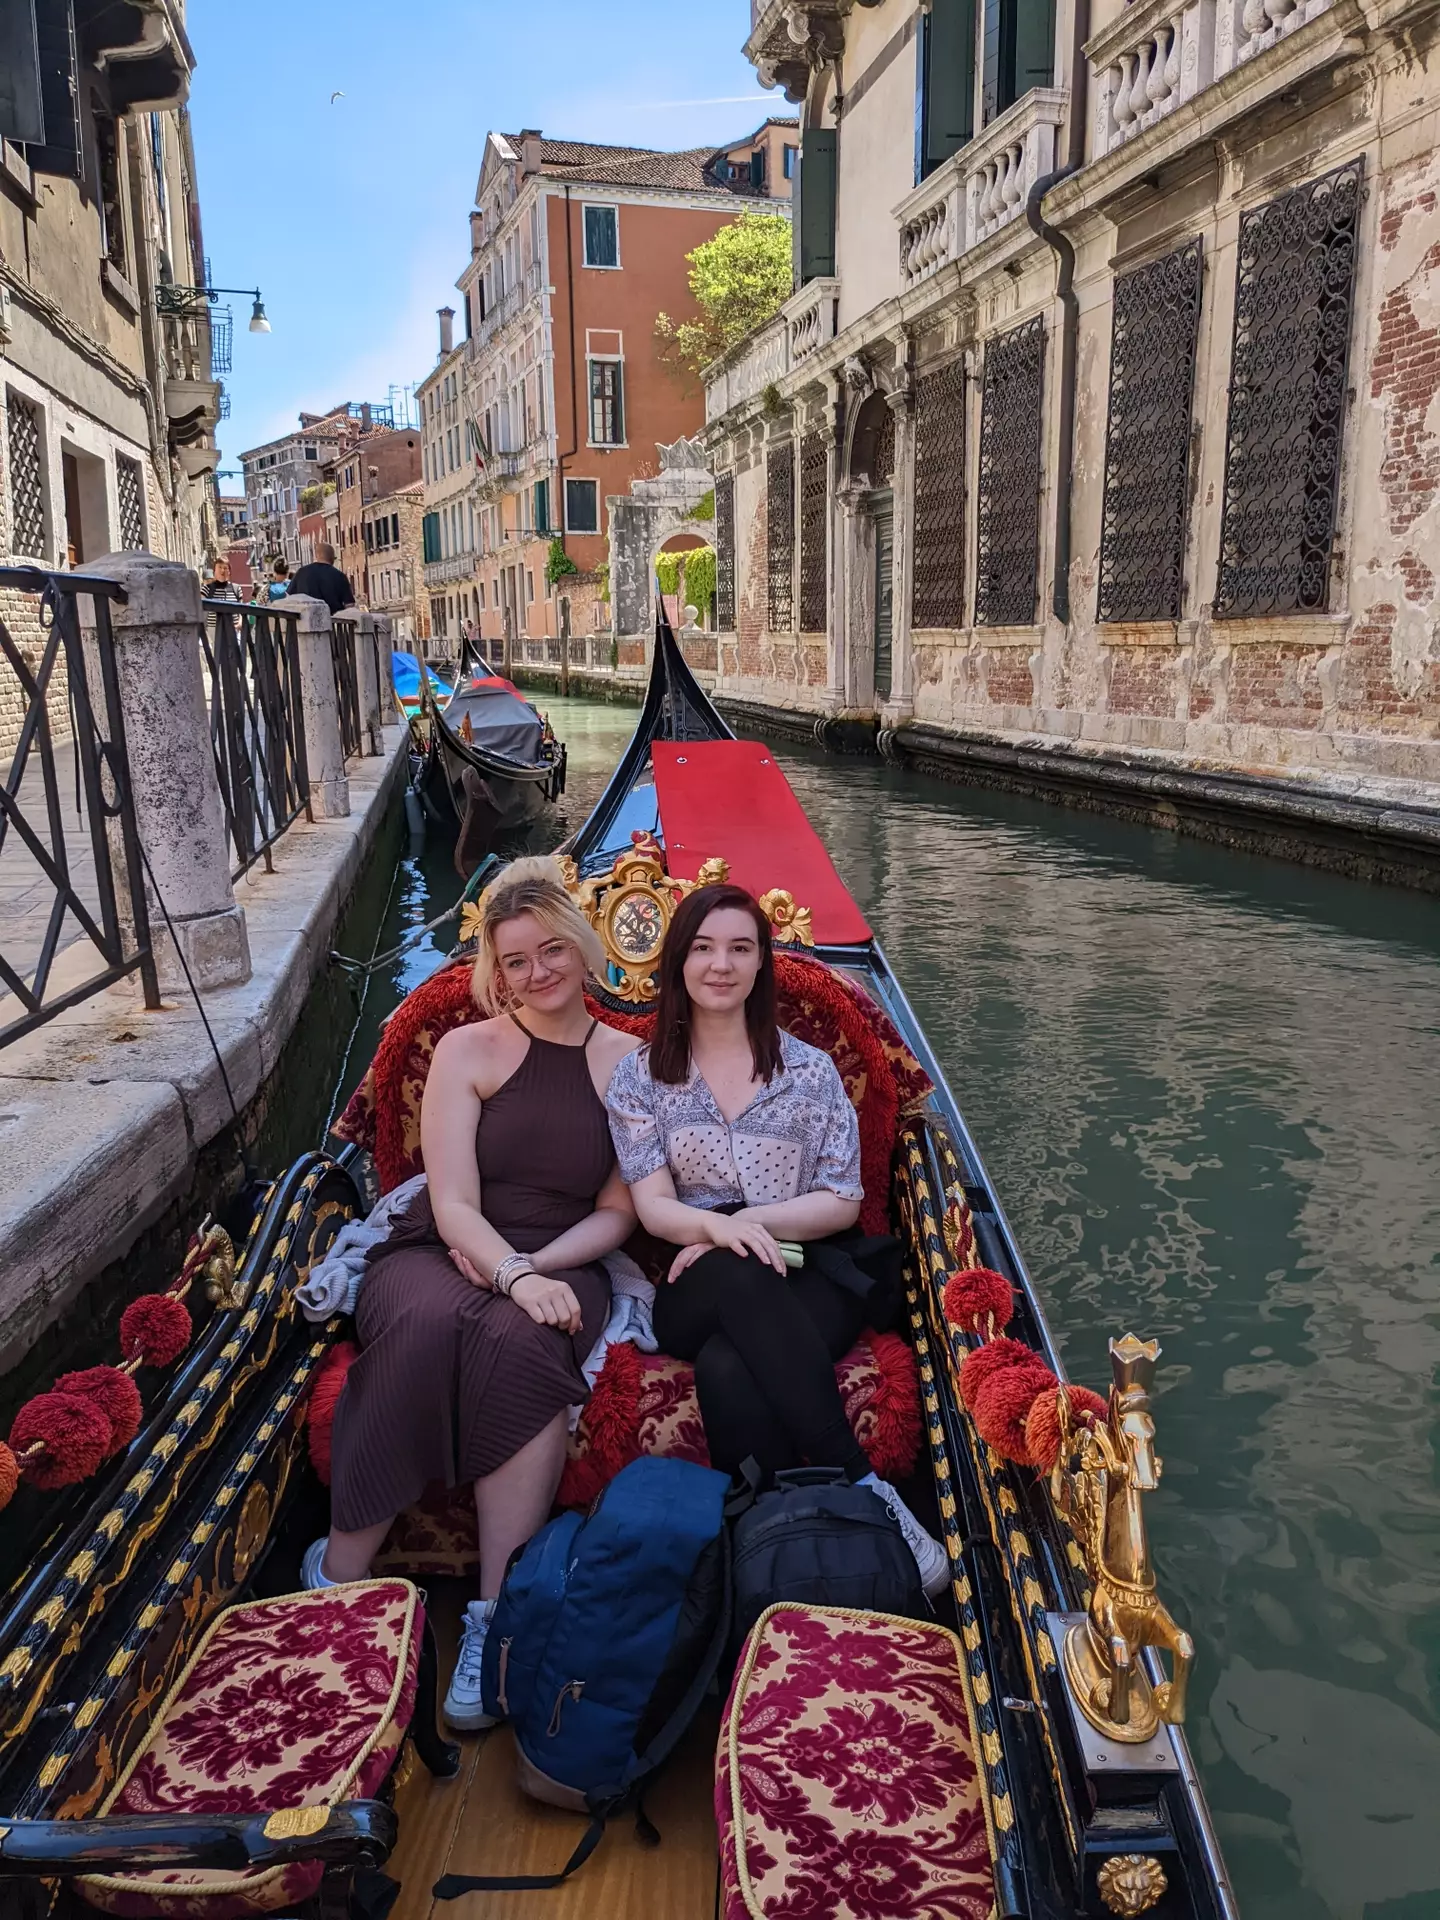 The Brit only spent £80 extra for her three-day trip to Venice.